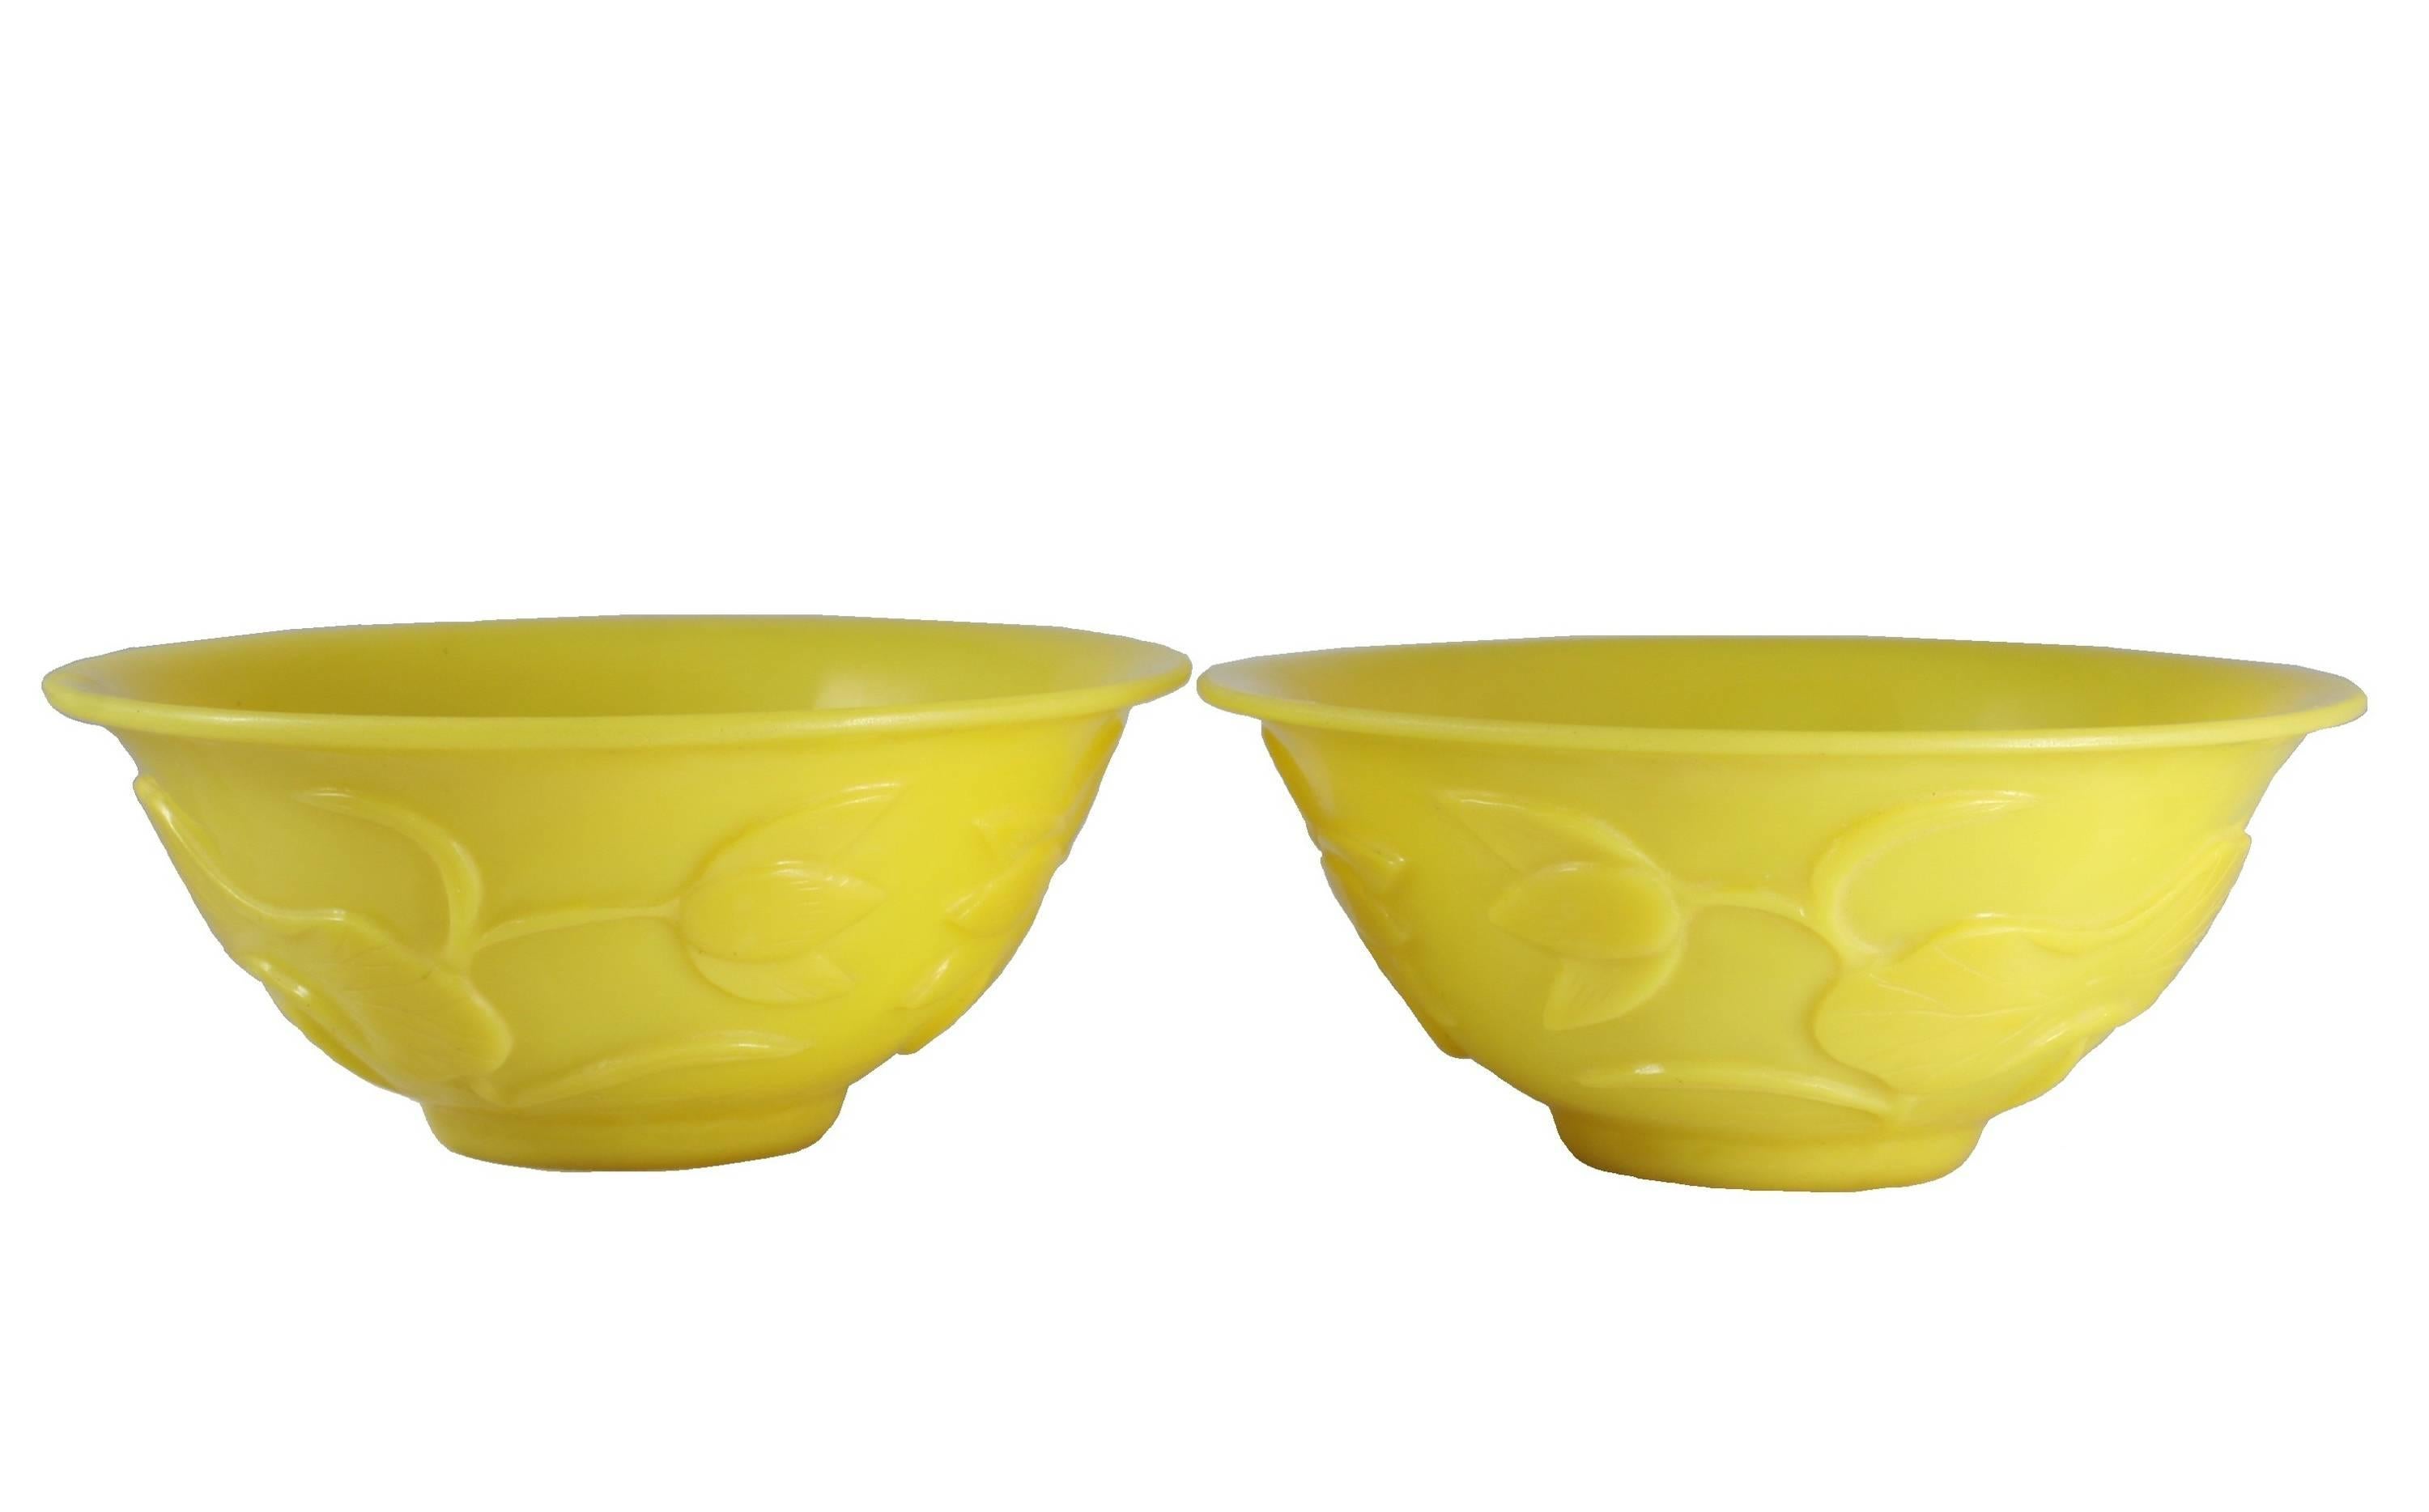 19th Century Chinese Pair of Imperial Yellow Monochrome Peking Glass Bowls